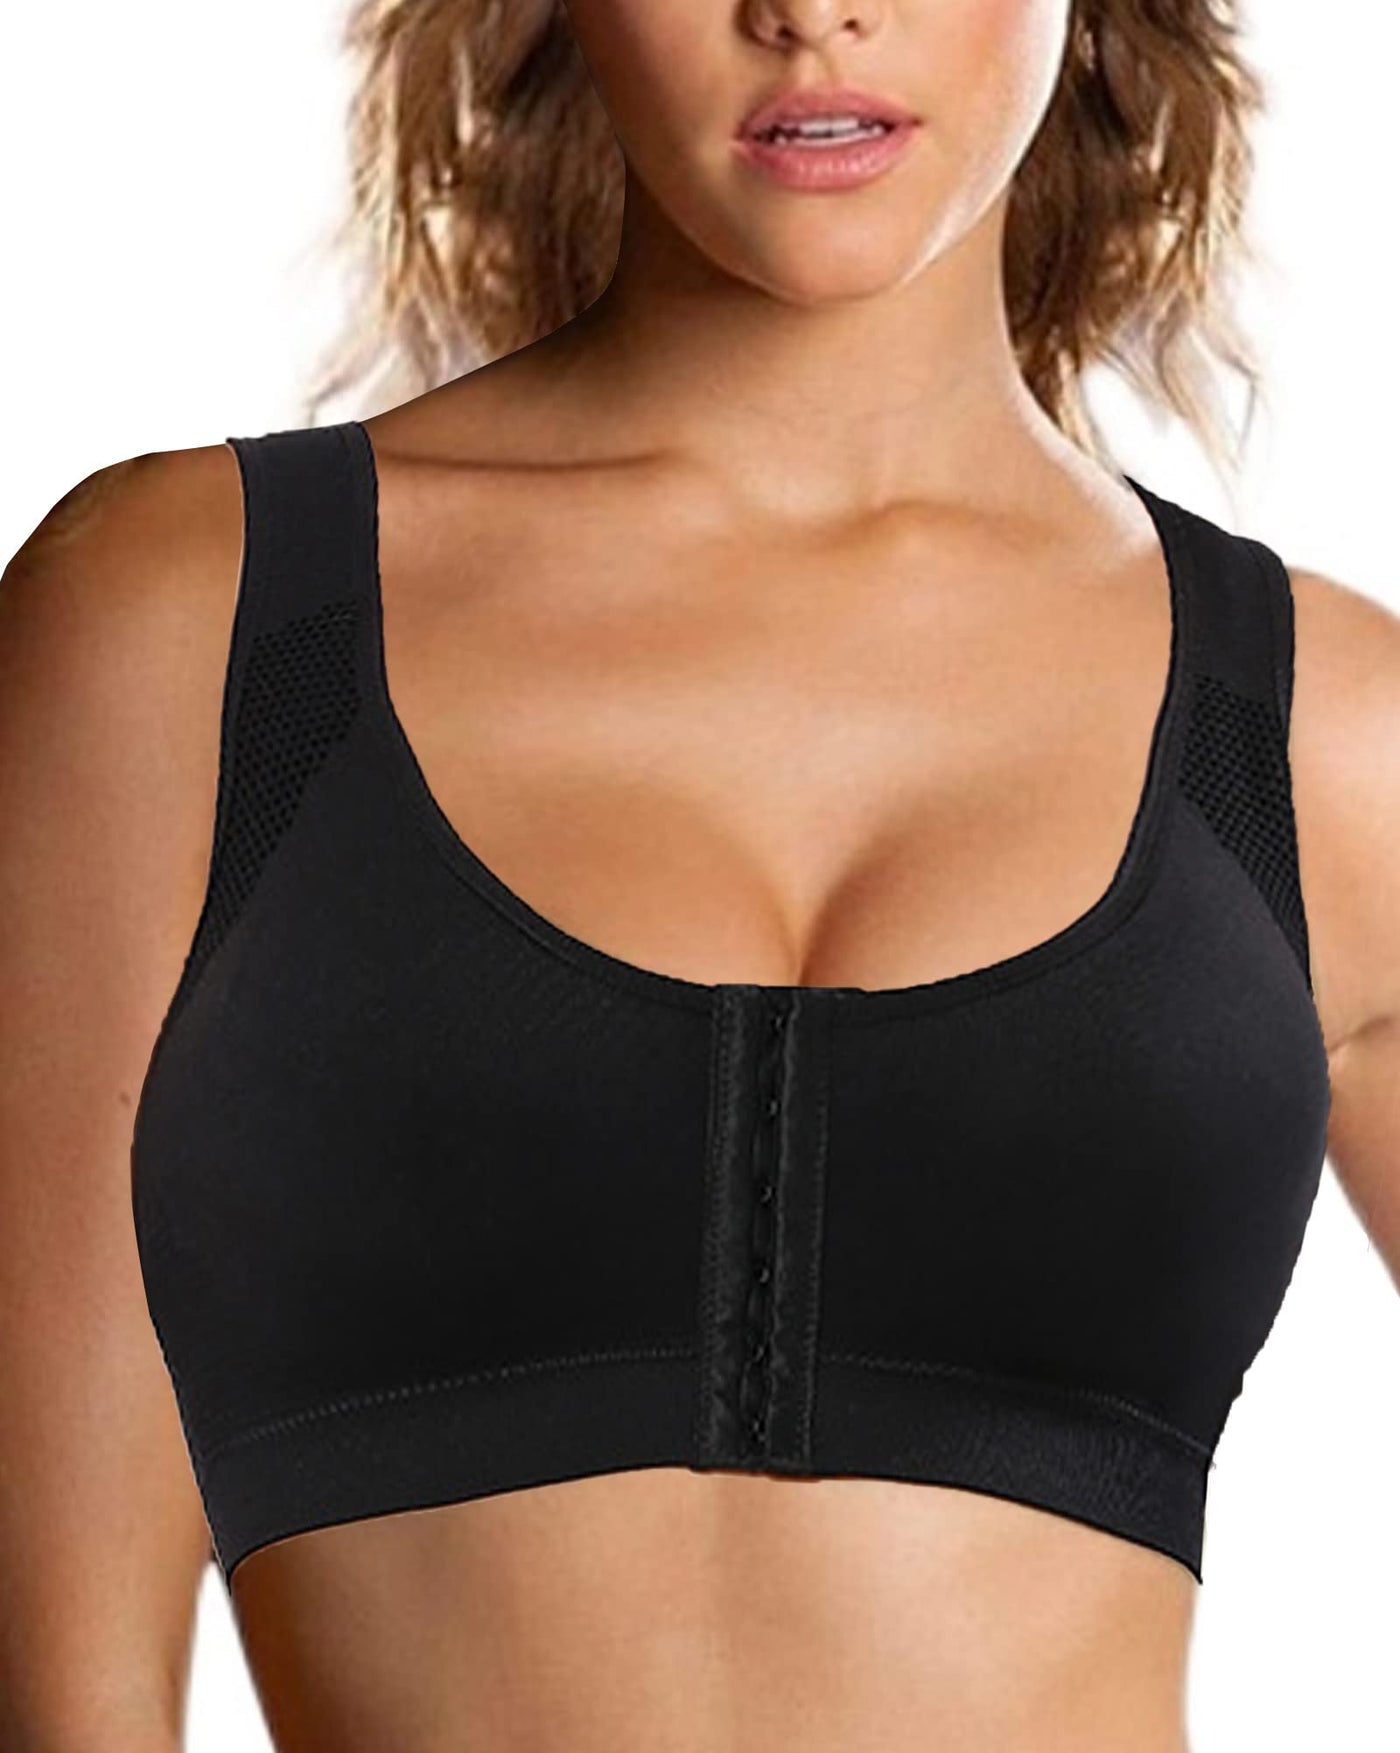 Best mastectomy bras for post-surgery UK